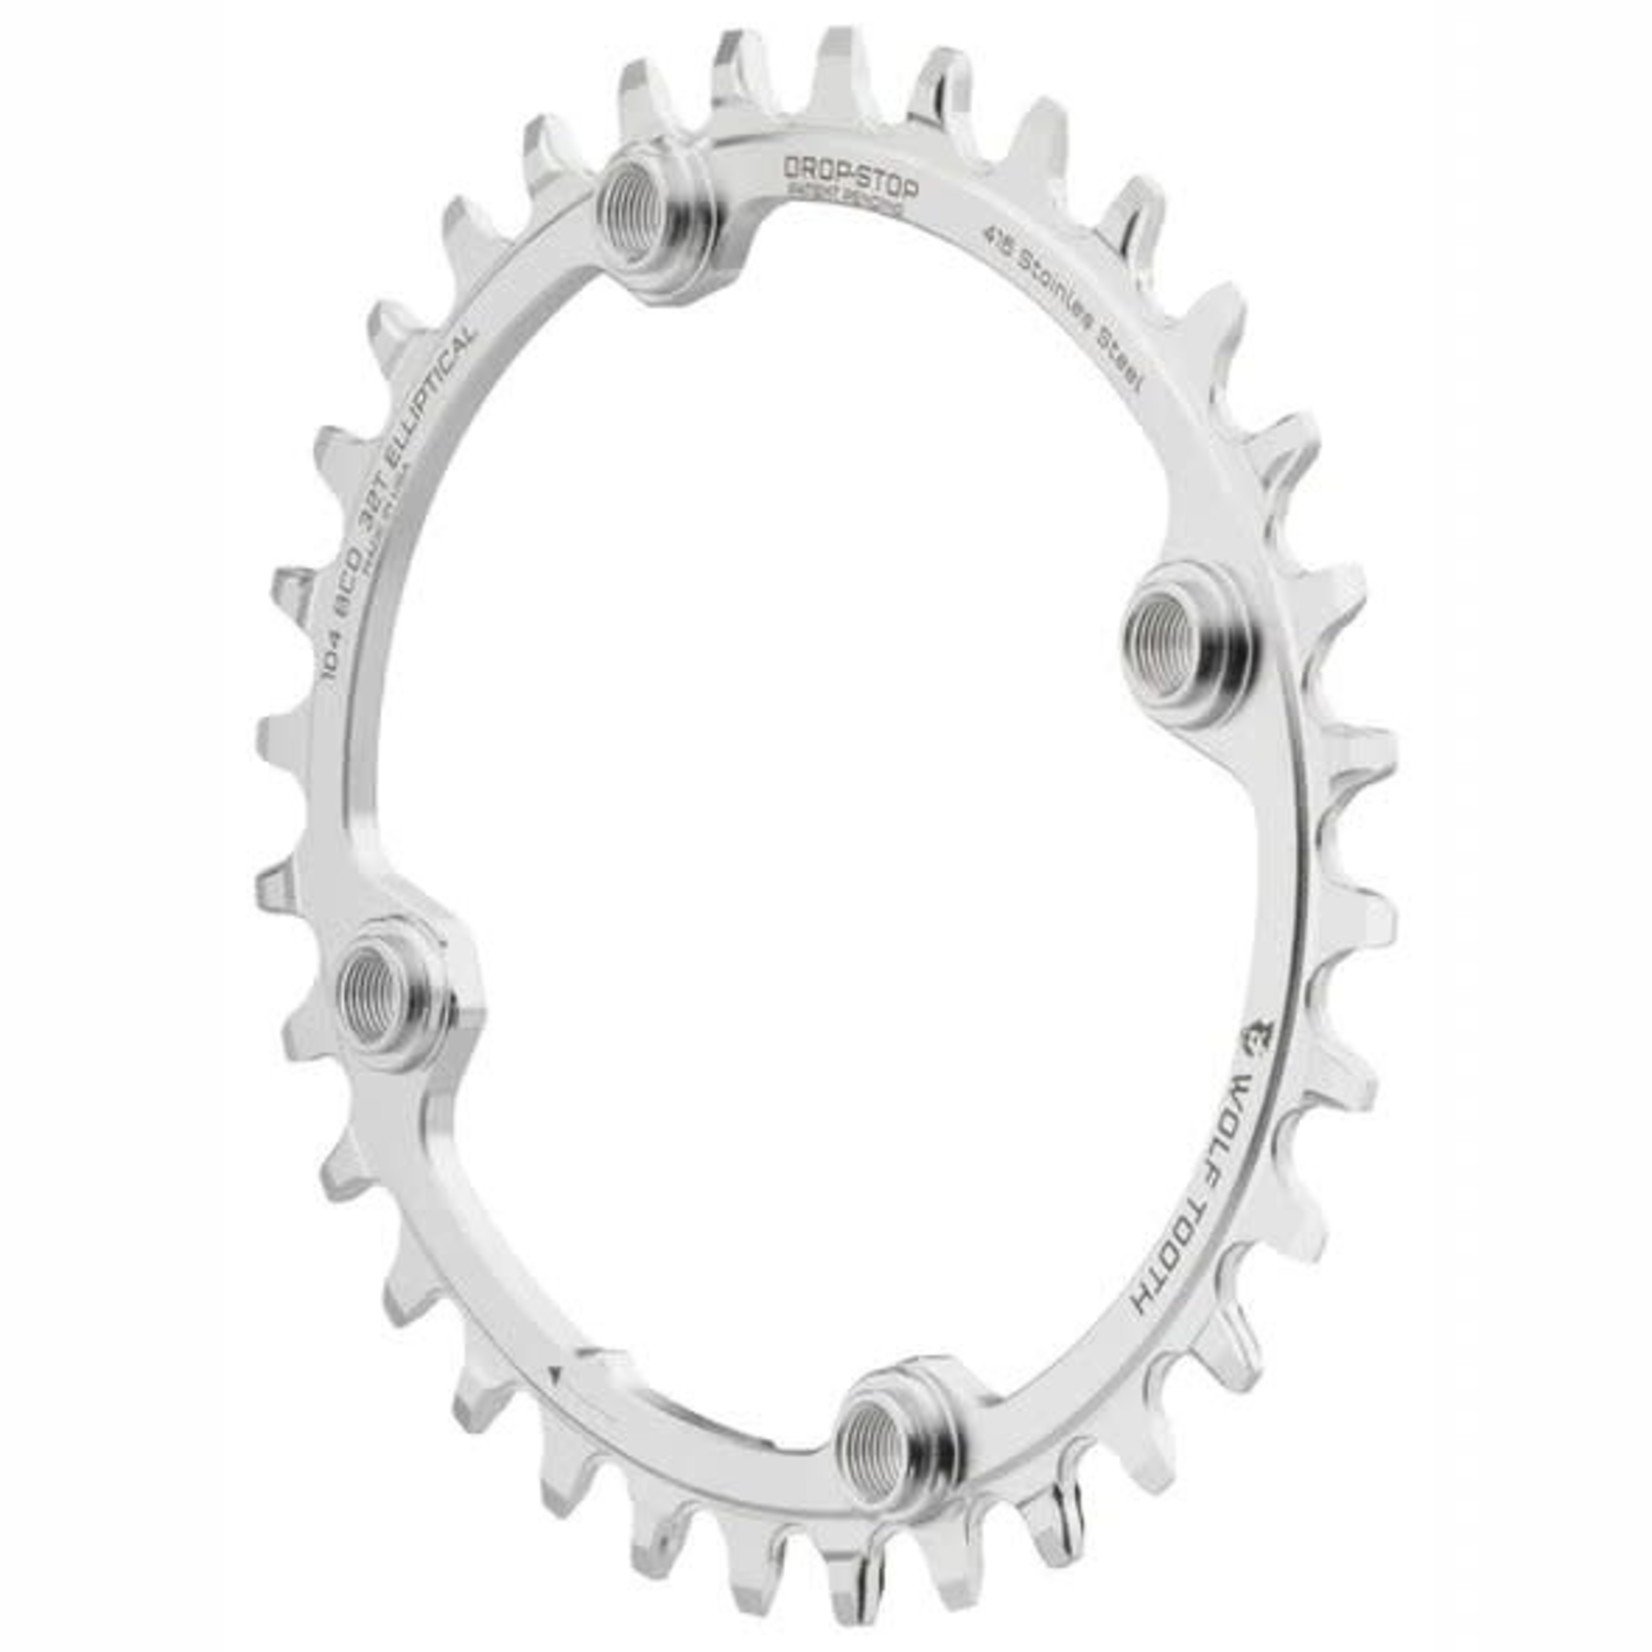 Wolf Tooth Components Wolf Tooth Elliptical 104 BCD Chainring - 32t, 104 BCD, 4-Bolt, Drop-Stop, Stainless Steel, Silver